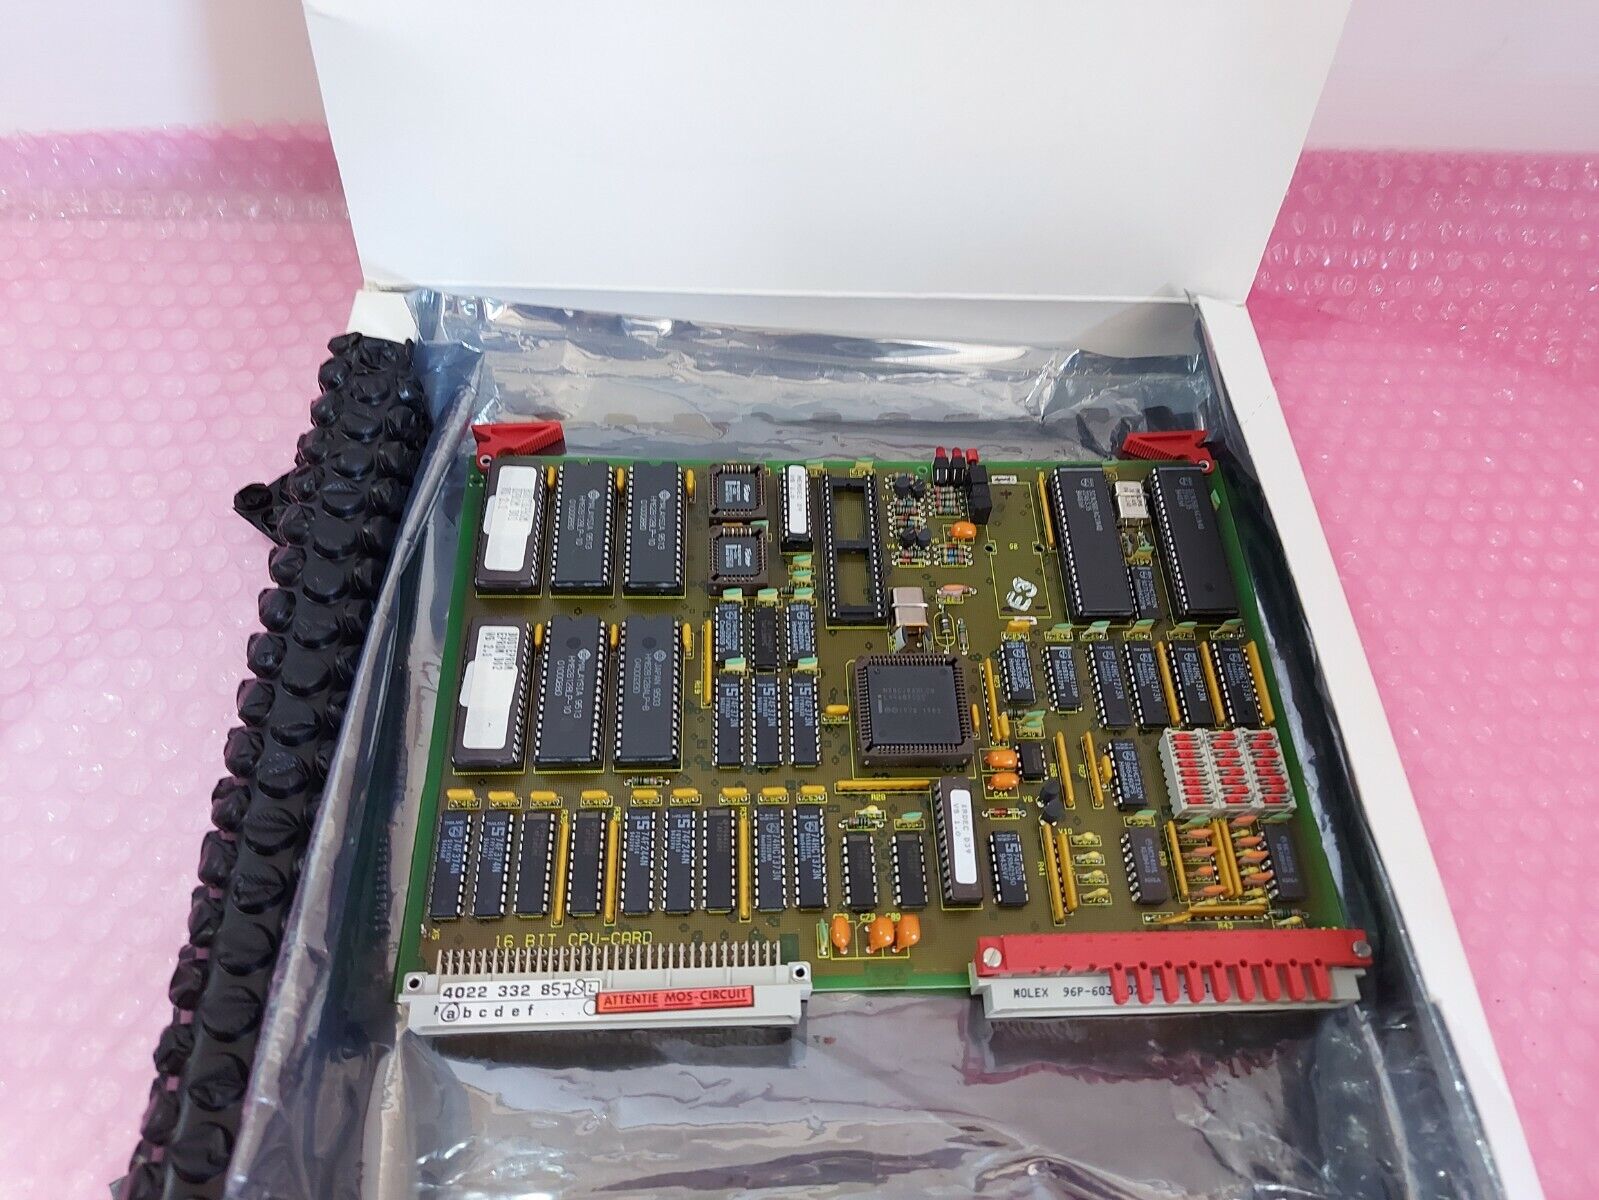 16 bit CPU card  4022-332-8578 for Philips  spectrometer PW 2400